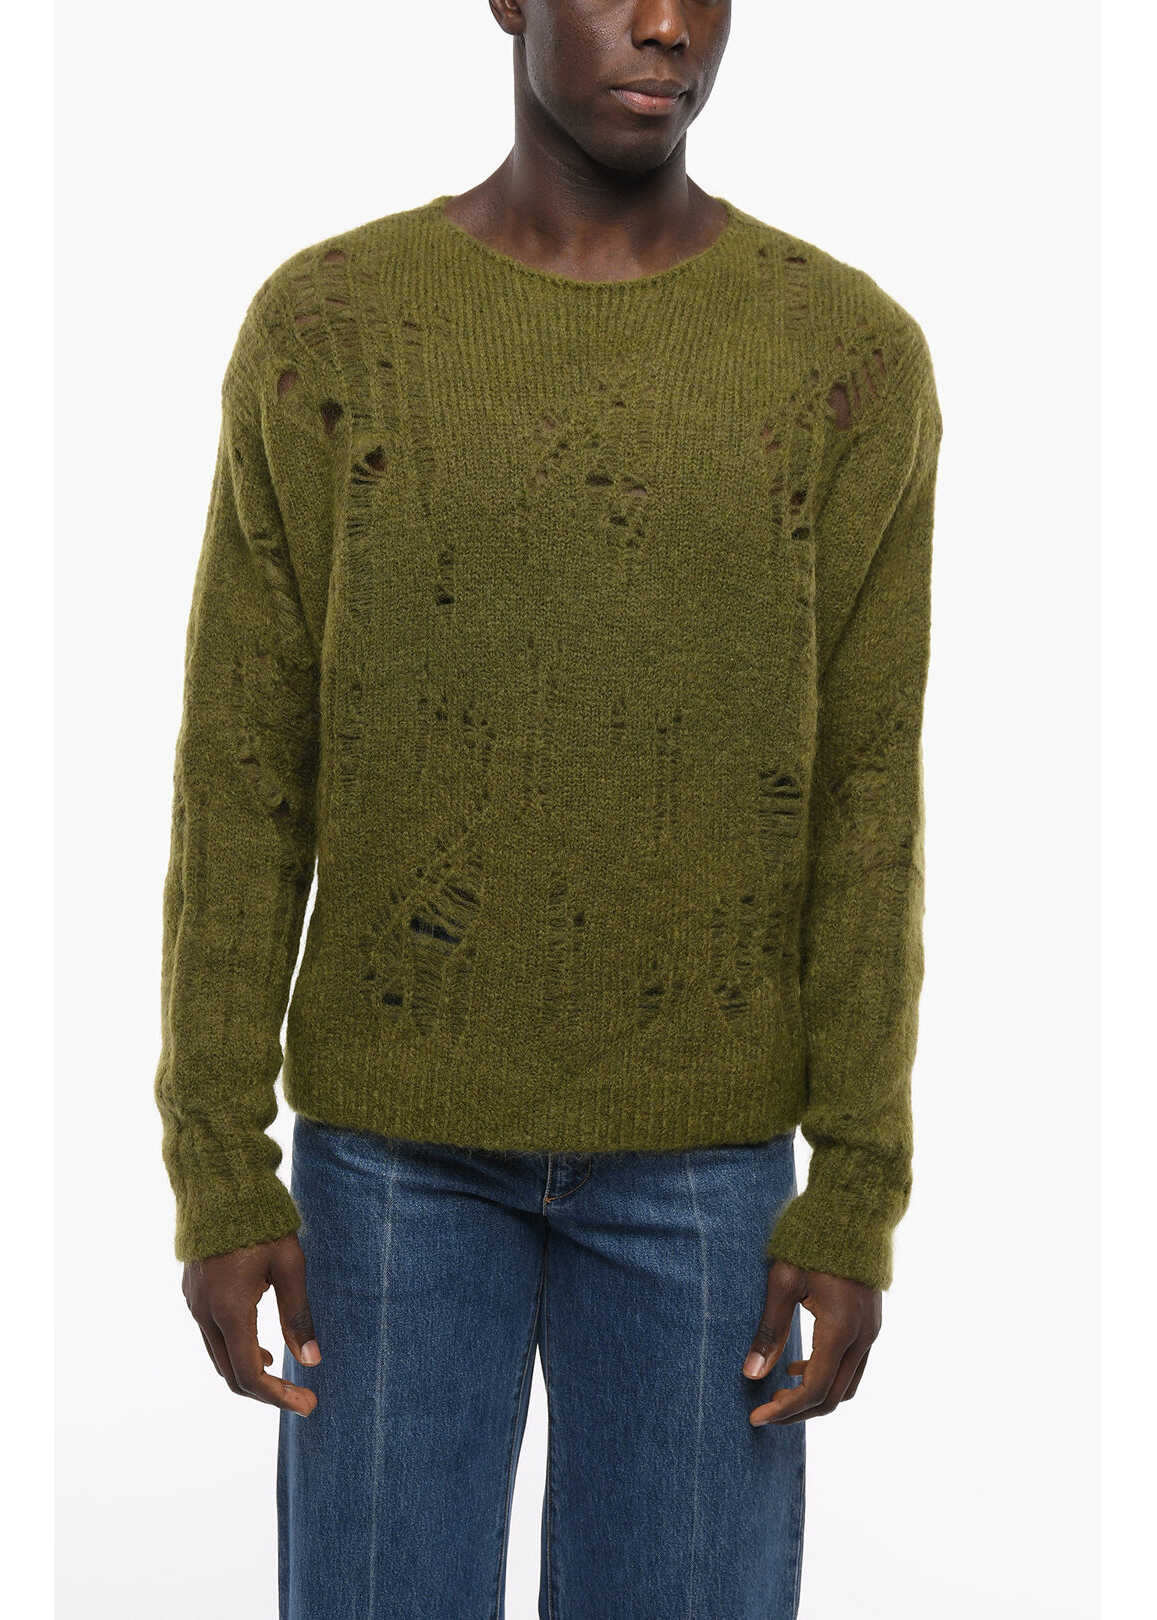 RAMAEL Crew Neck Distressed Mohair Blend Pullover Military Green